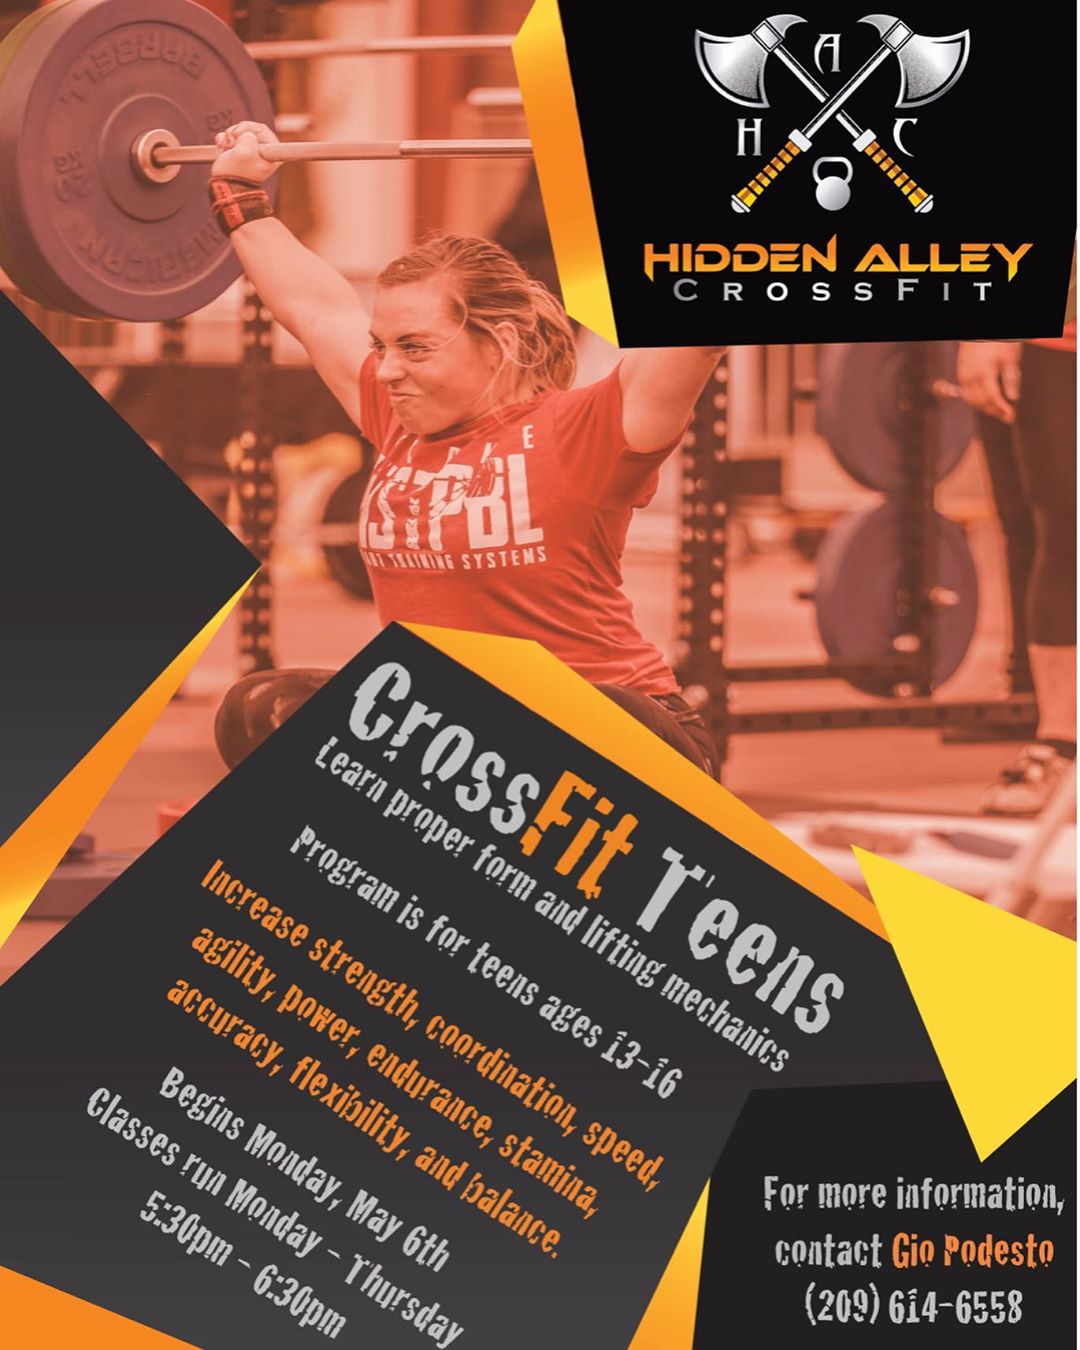 CrossFit Teens program starts May 6th! Classes will be ran Monday-Thursday from 5:30-6:30pm. No contracts, flexible pricing options, and all the right type of training for ages 13-16 years of age! DM for more details or call/text the number on the flyer